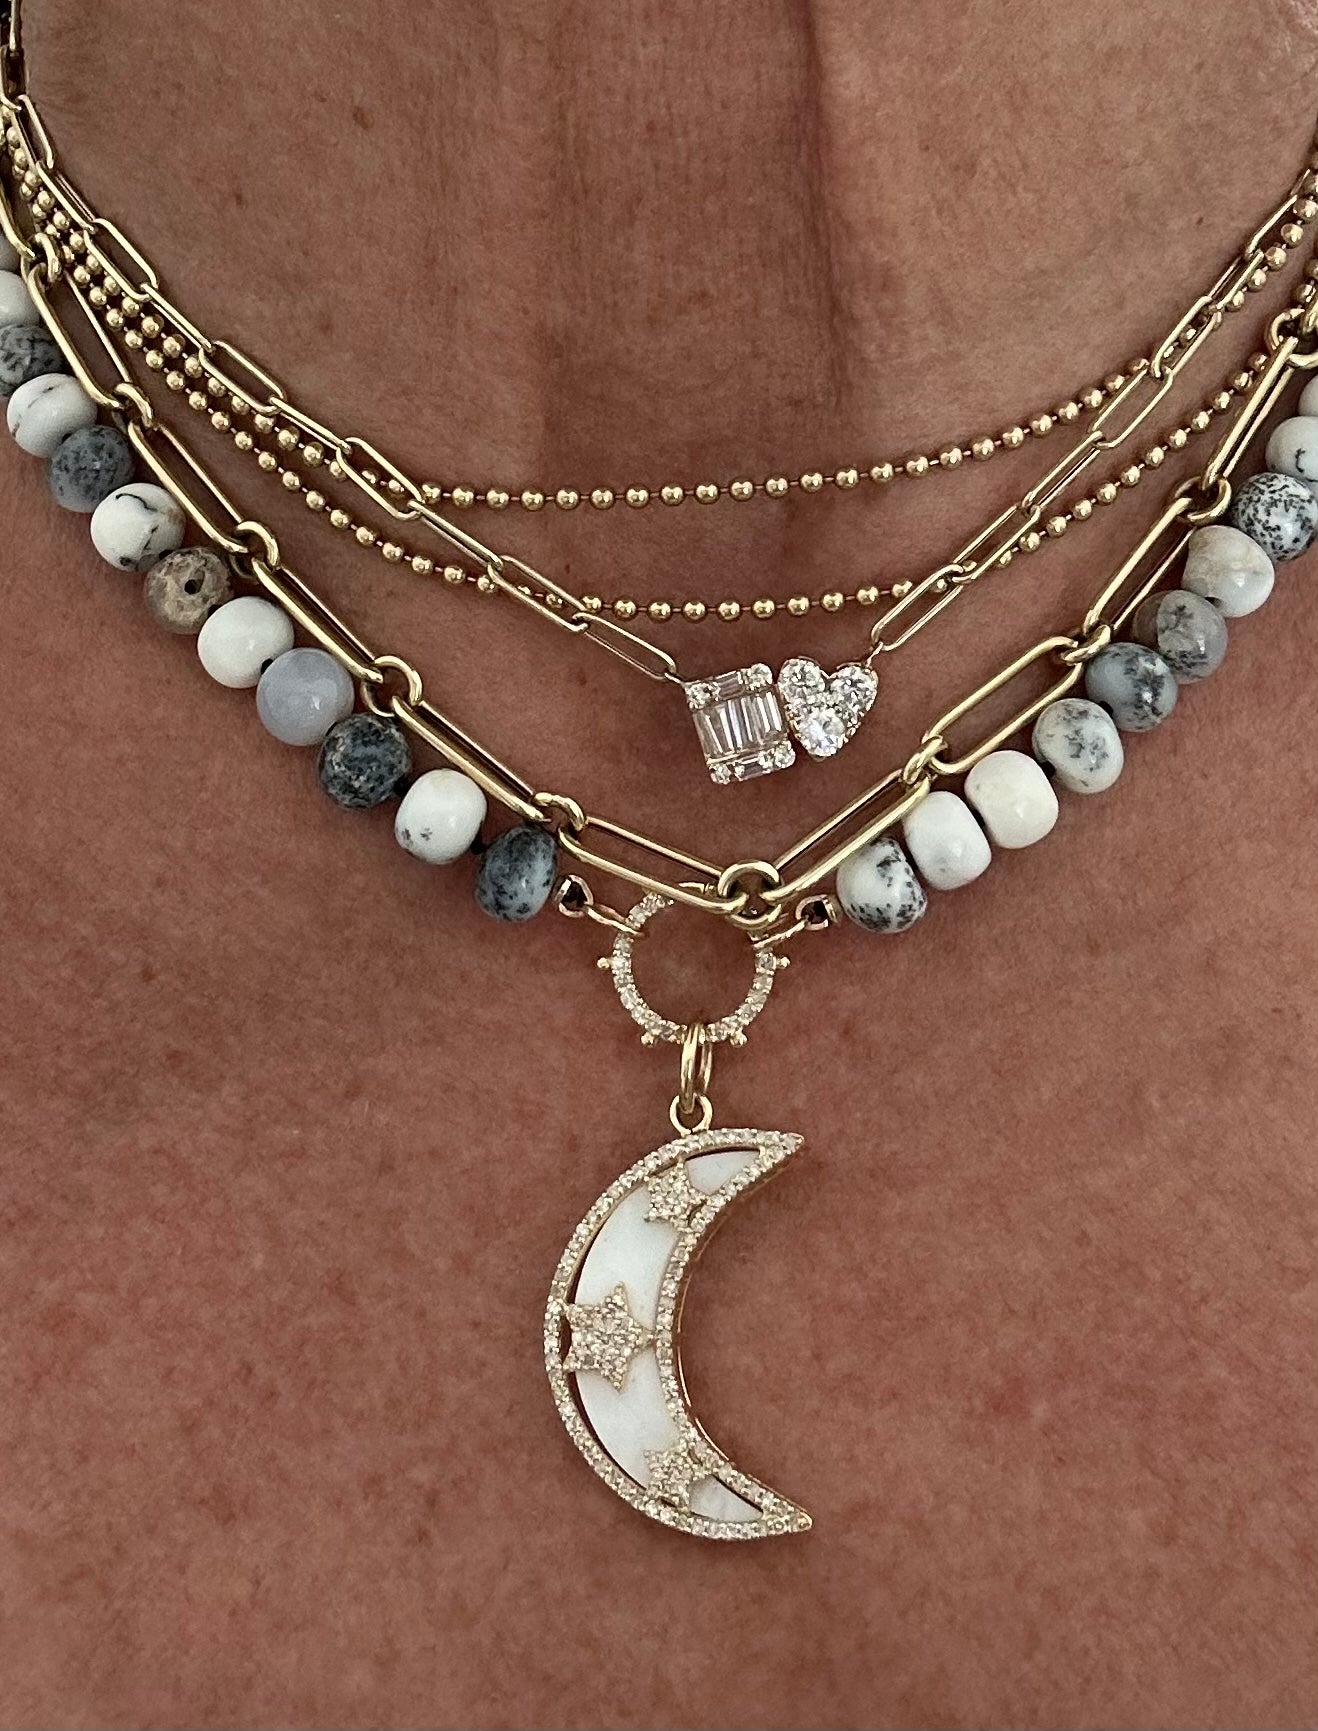 Dendritic Opal Gemstone Necklace